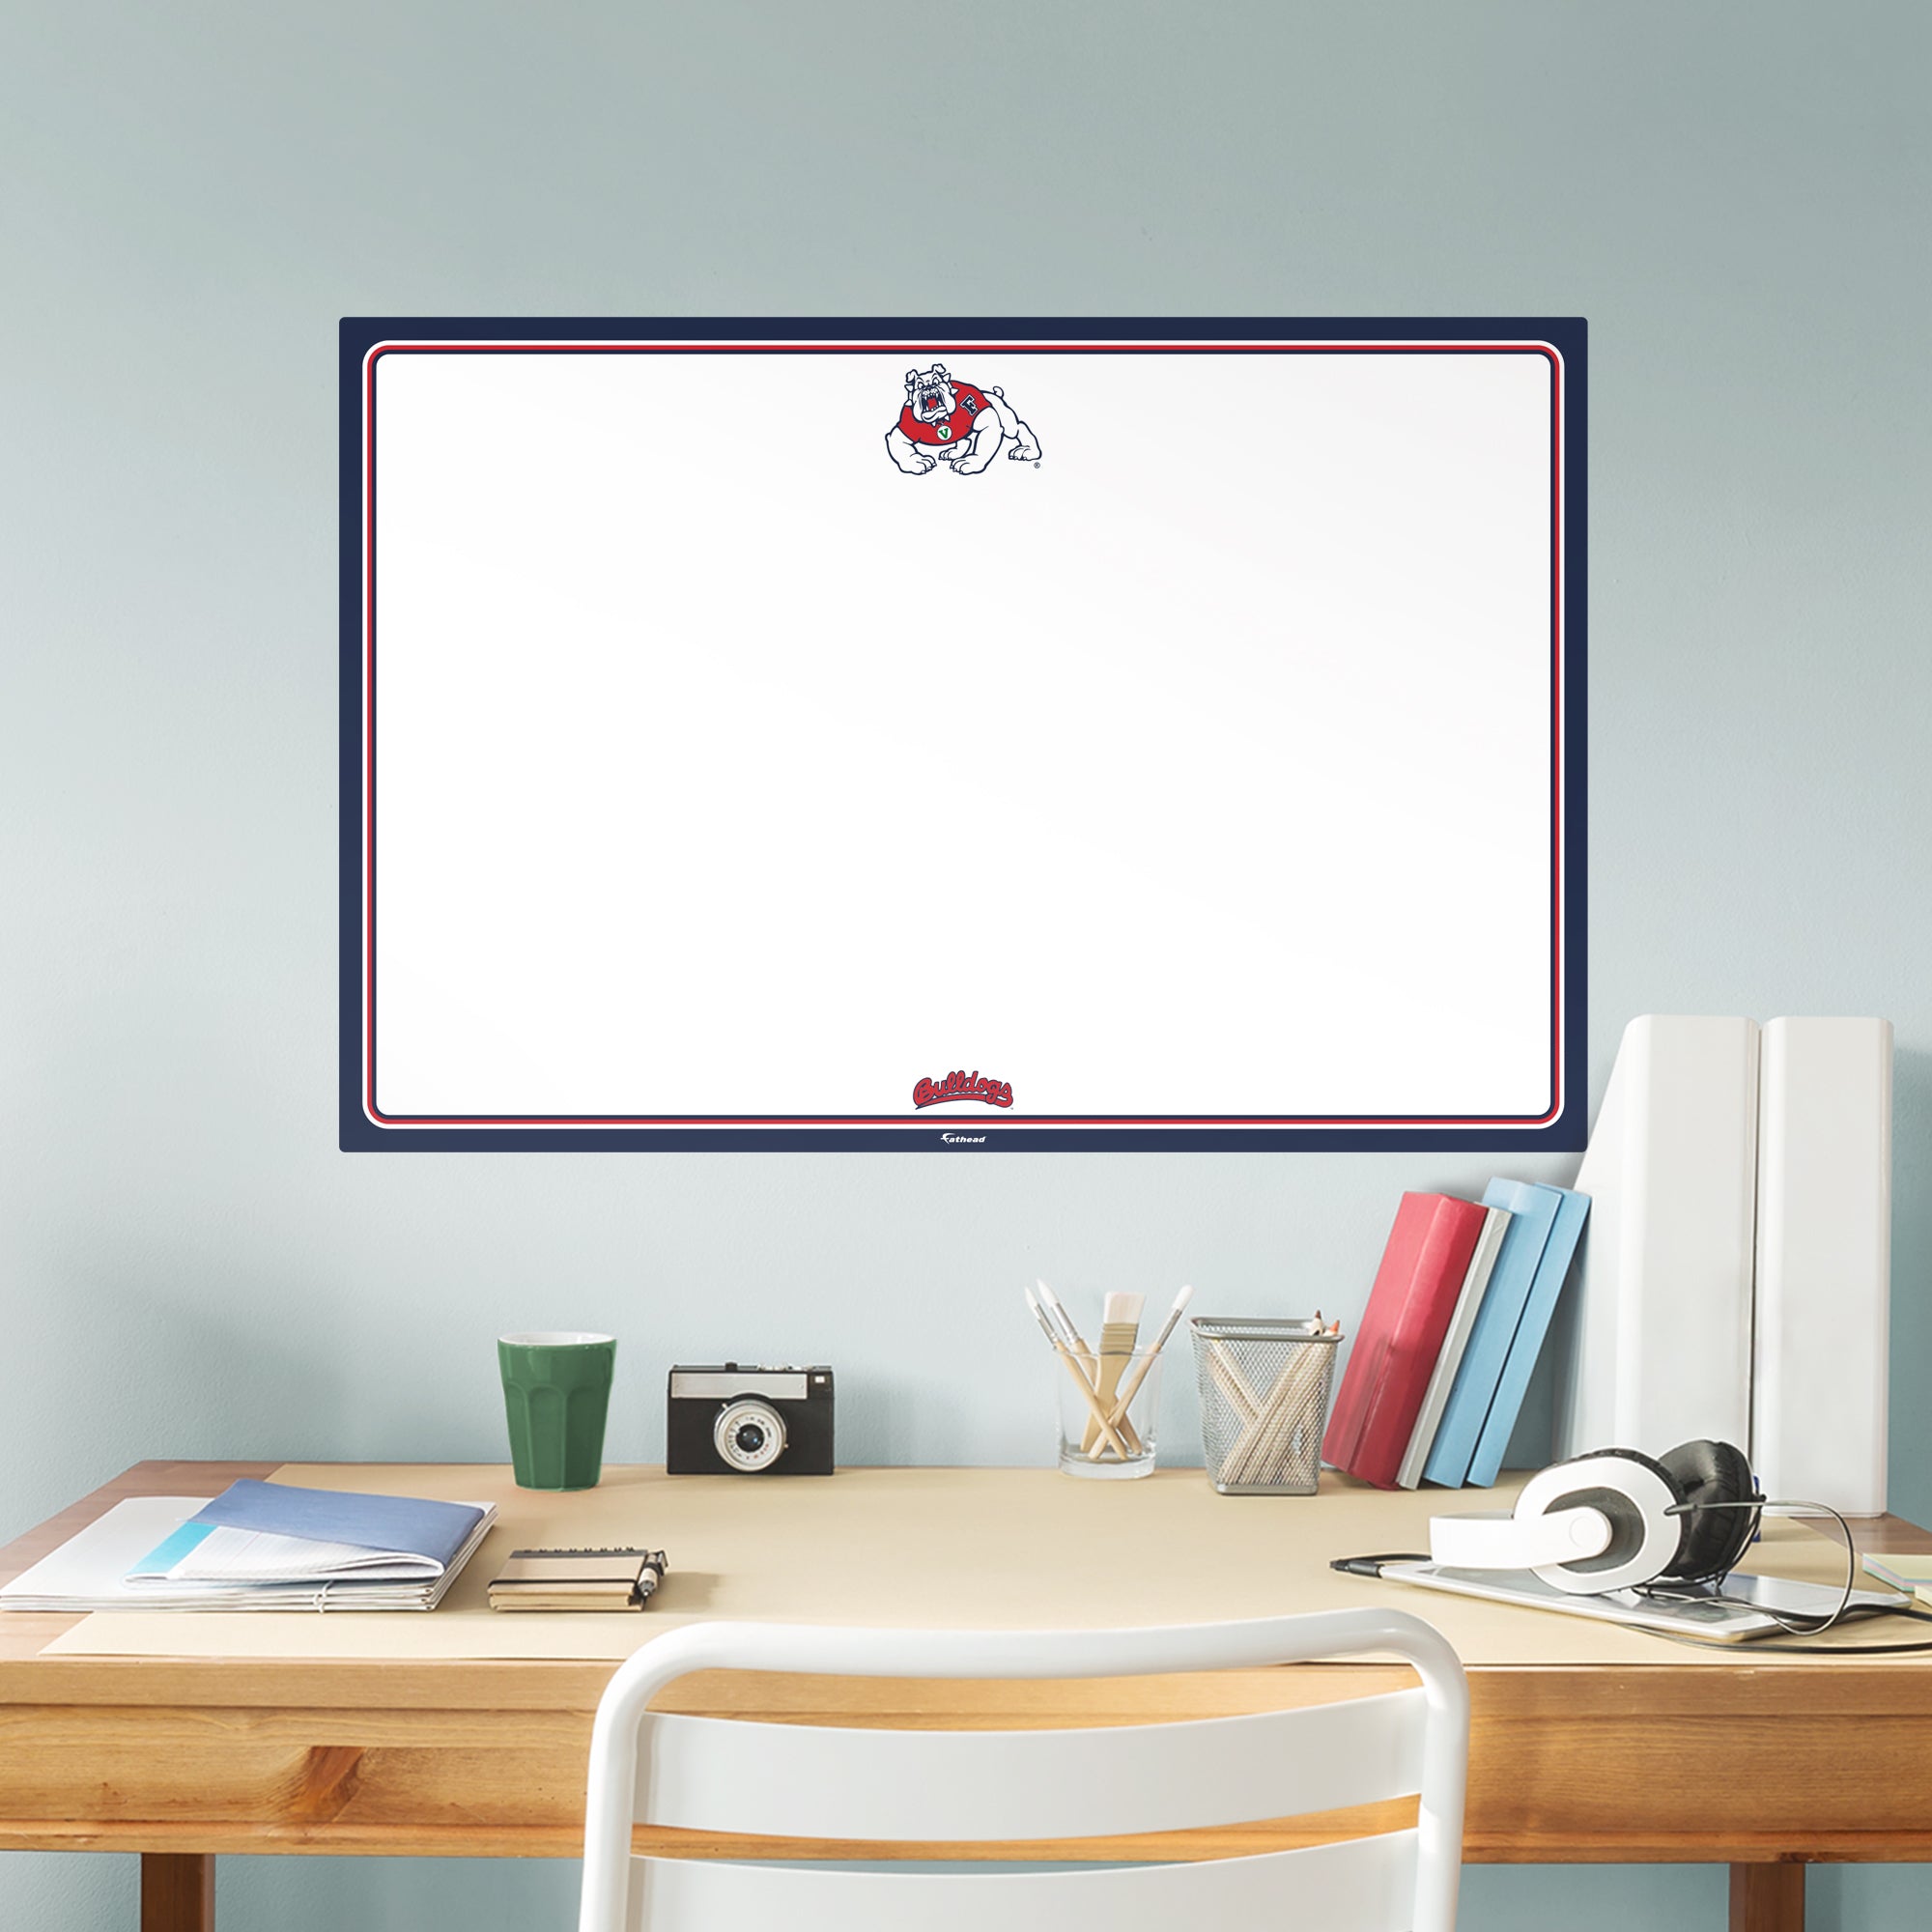 Fresno State Bulldogs: Dry Erase Whiteboard - X-Large Officially Licensed NCAA Removable Wall Decal XL by Fathead | Vinyl